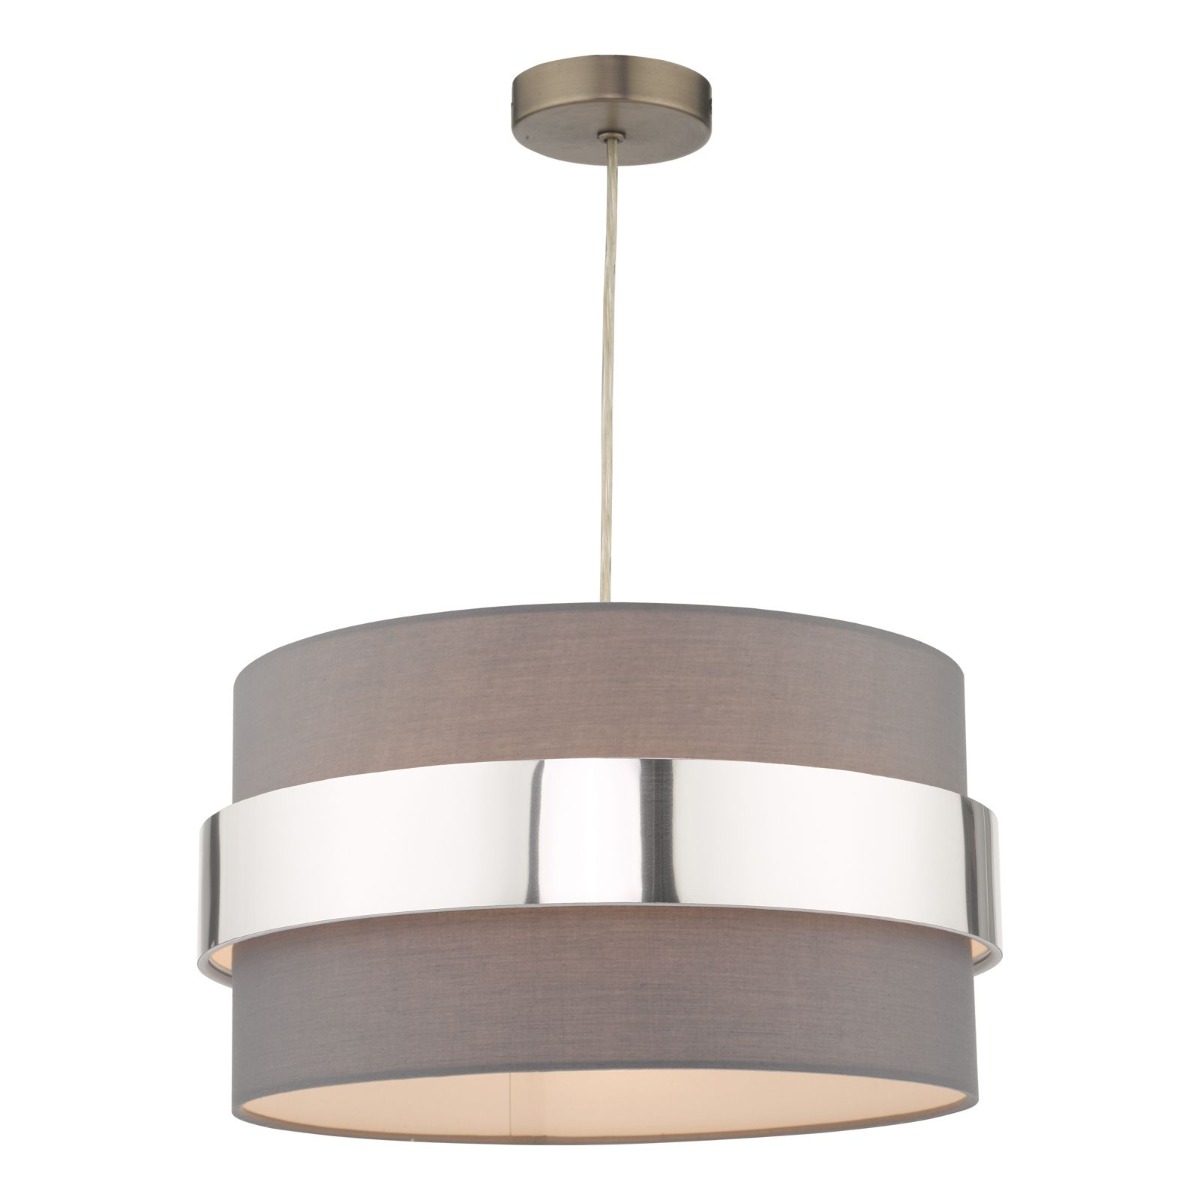 Image of Dar Wisebuys Oki Easy Fit Ceiling Pendant Shade In Grey And Chrome